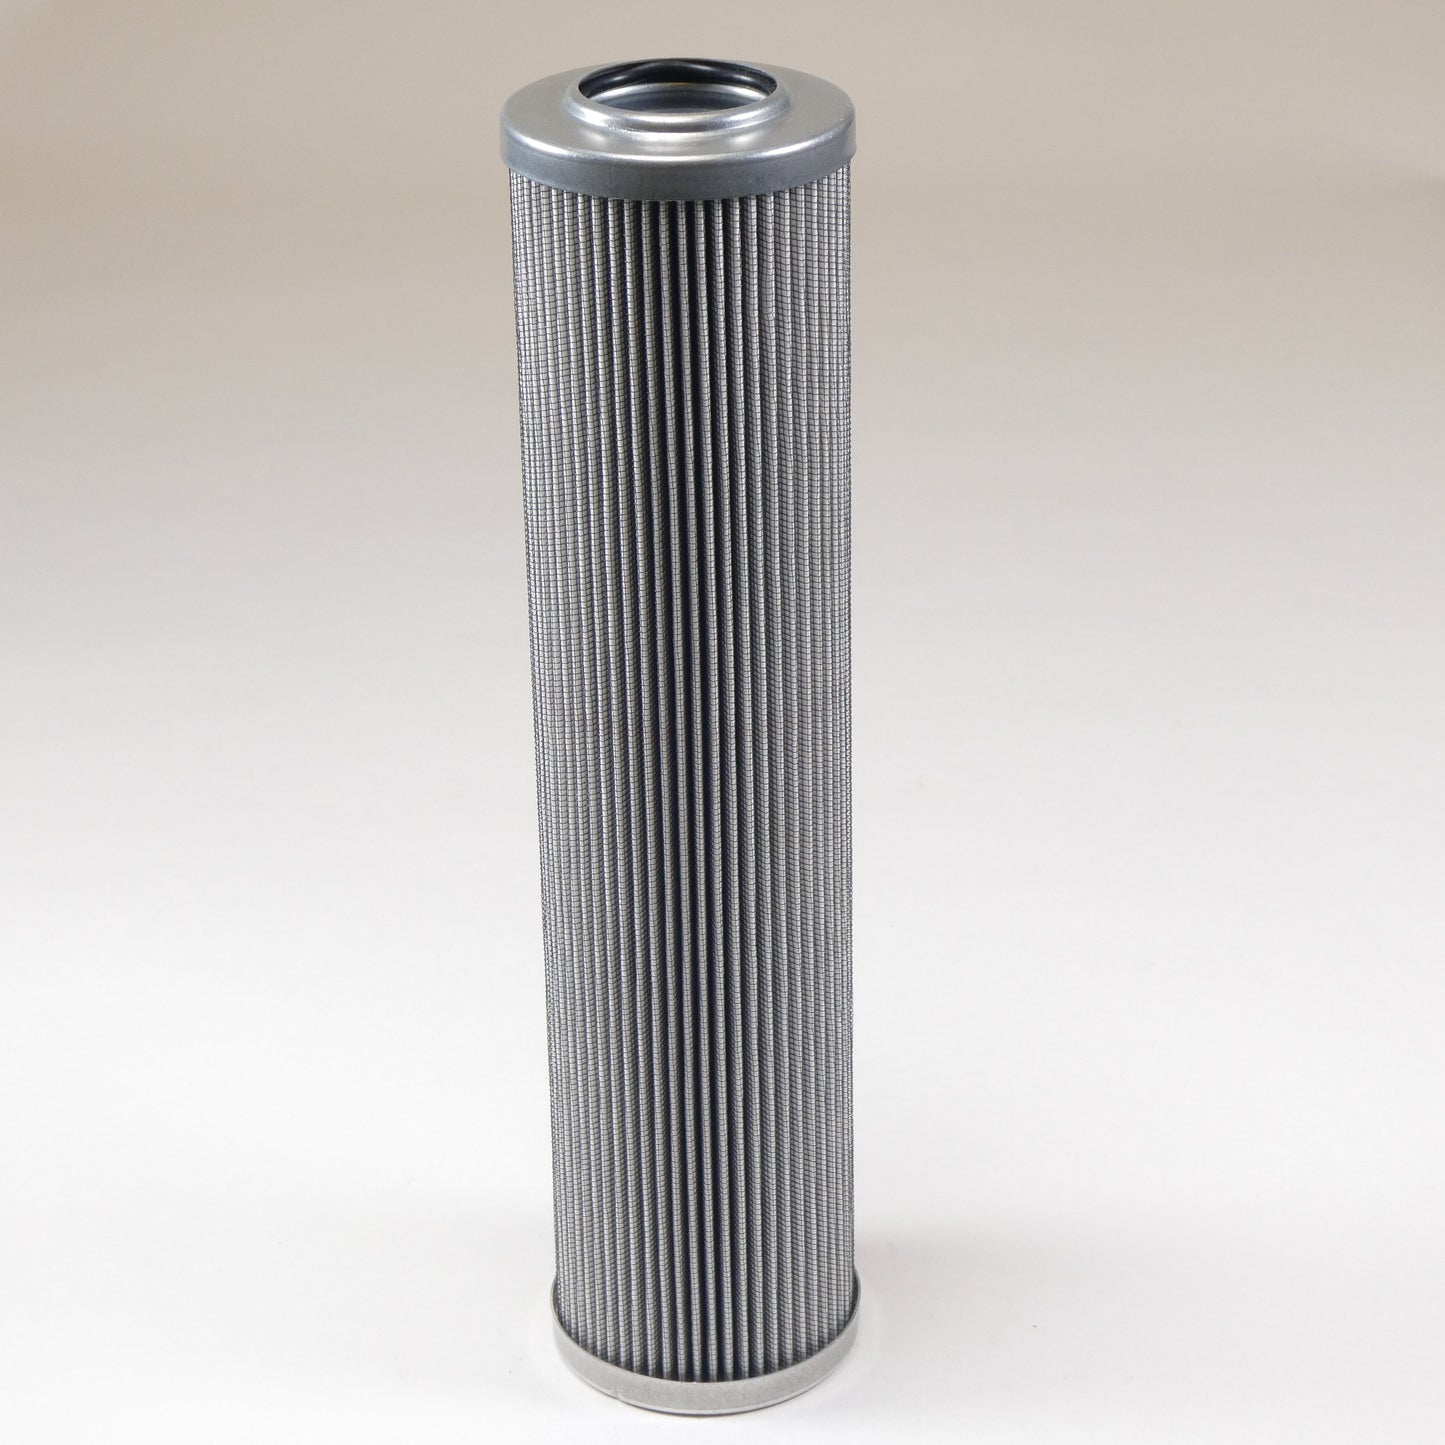 Hydrafil Replacement Filter Element for Hilco 3830-12-092-C